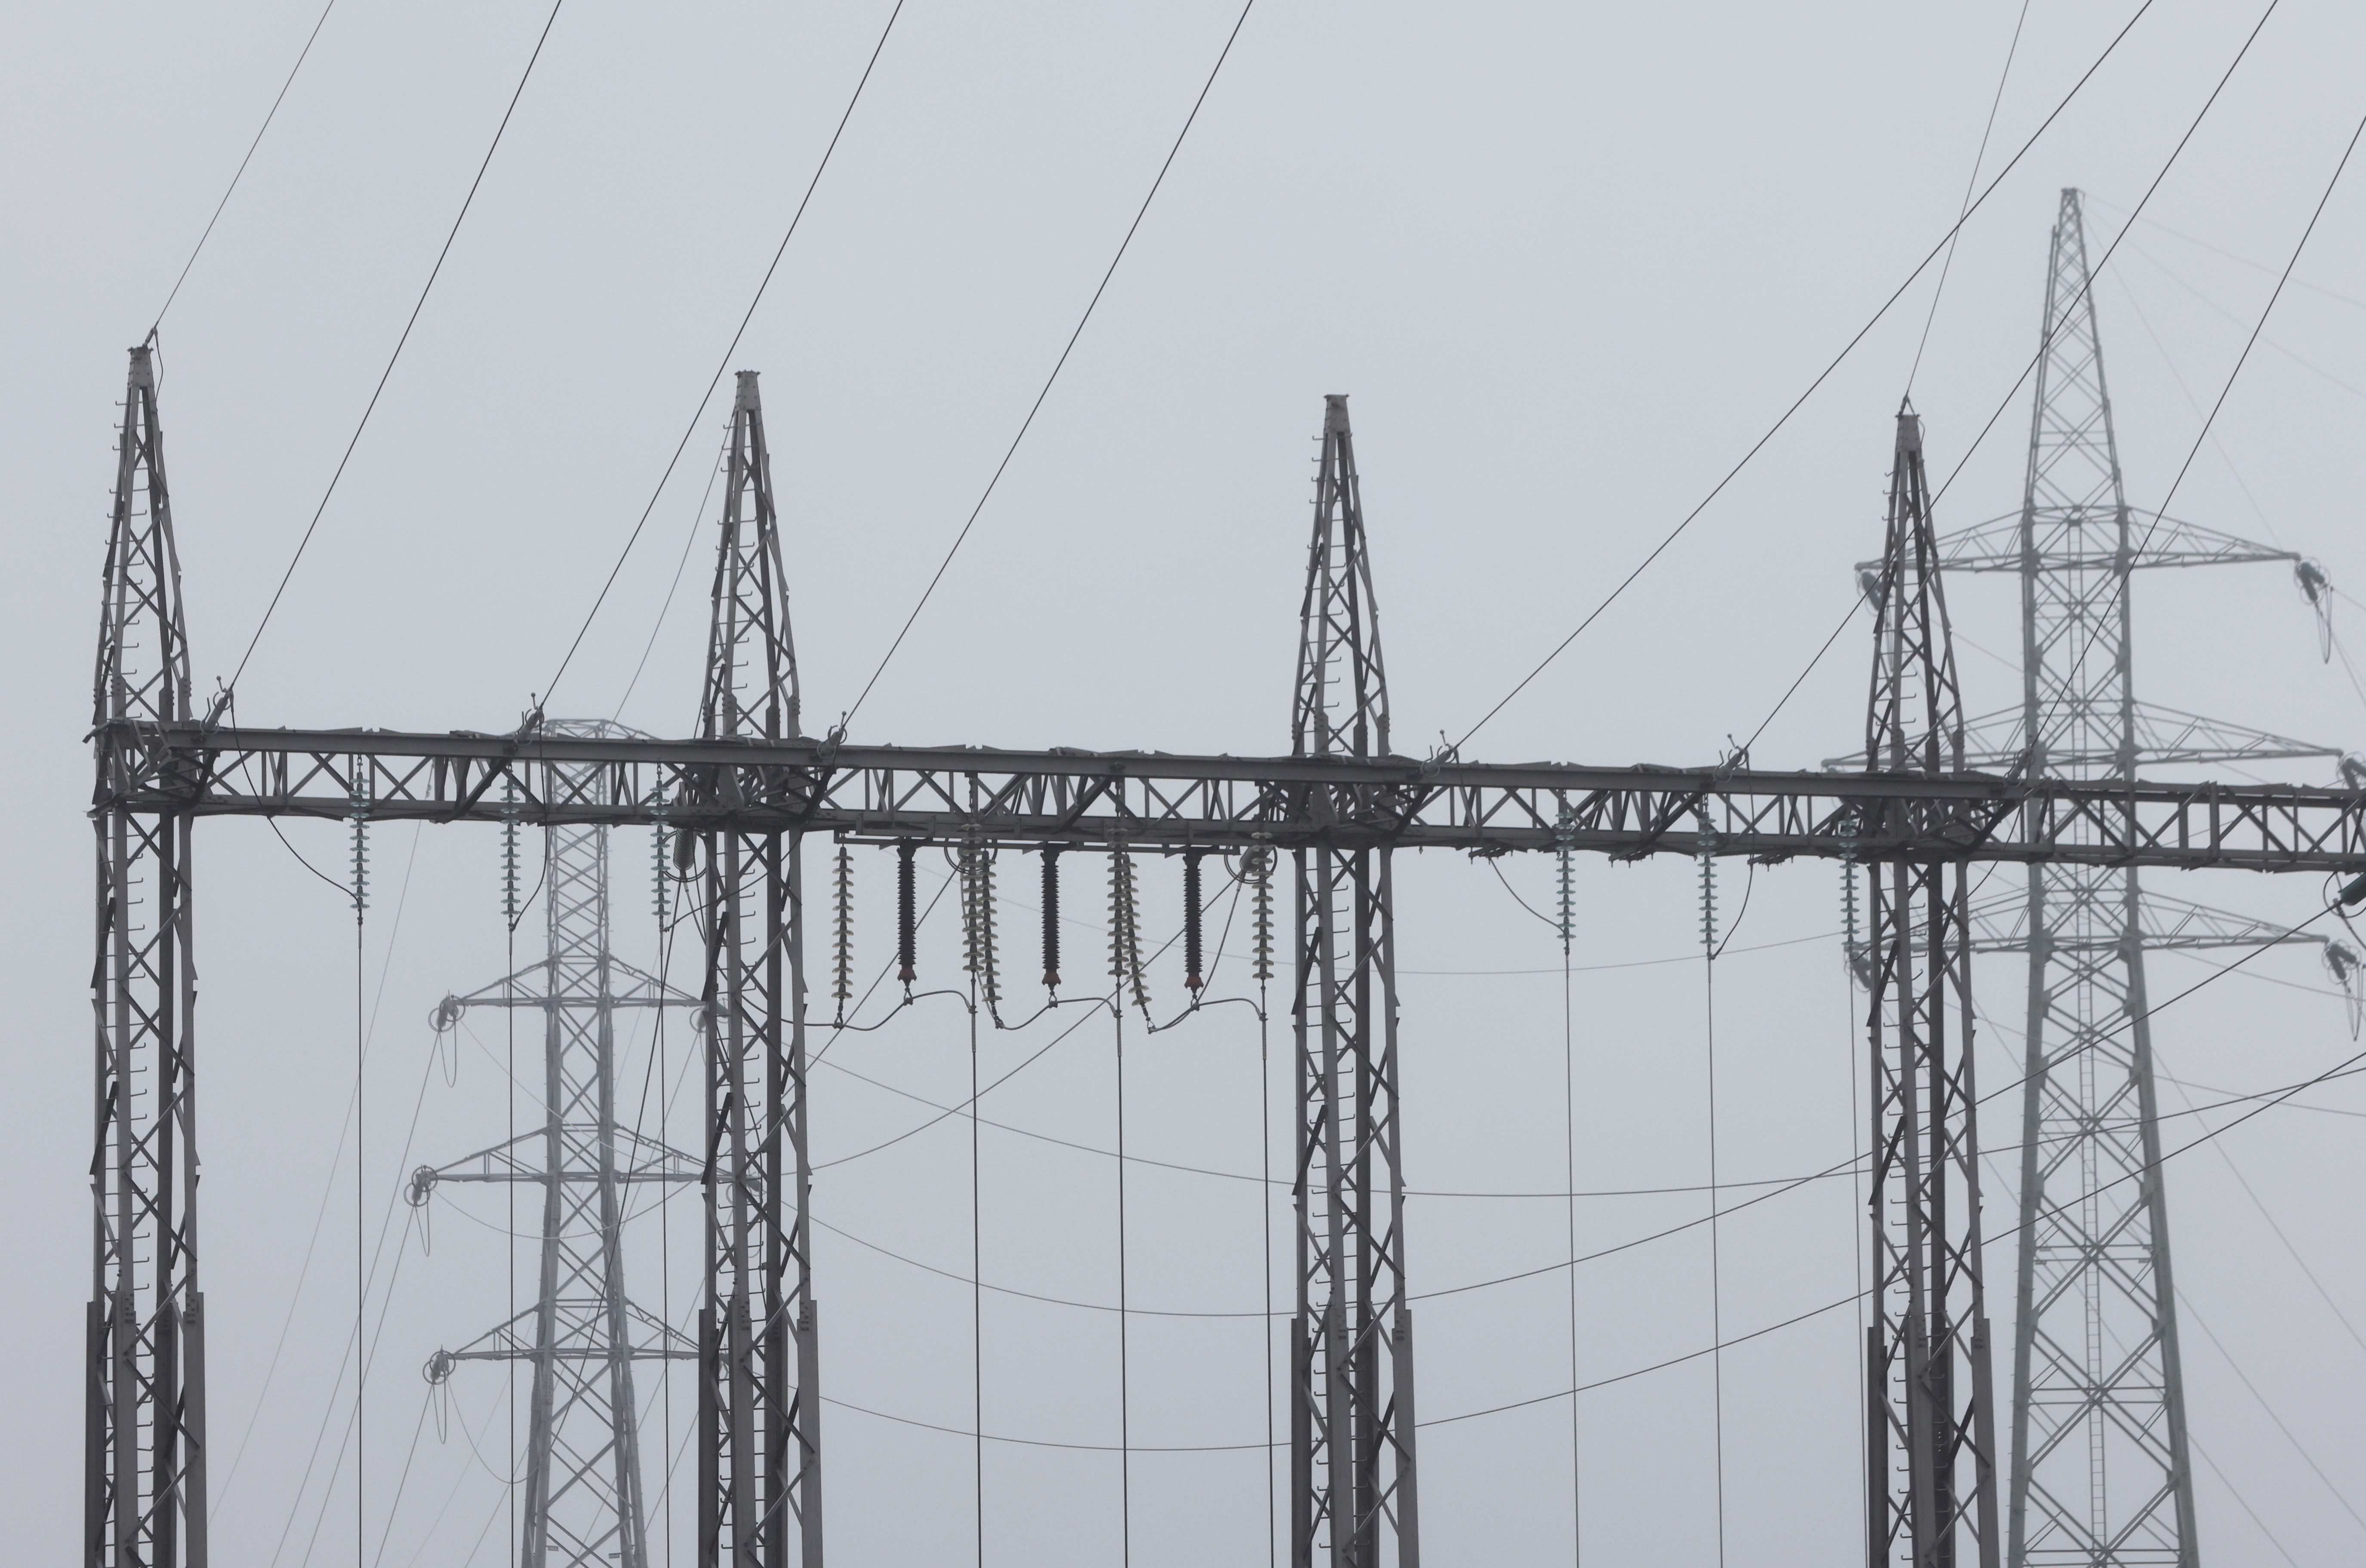 Electric pylons are seen at a combined-cycle gas turbine power plant in Drogenbos